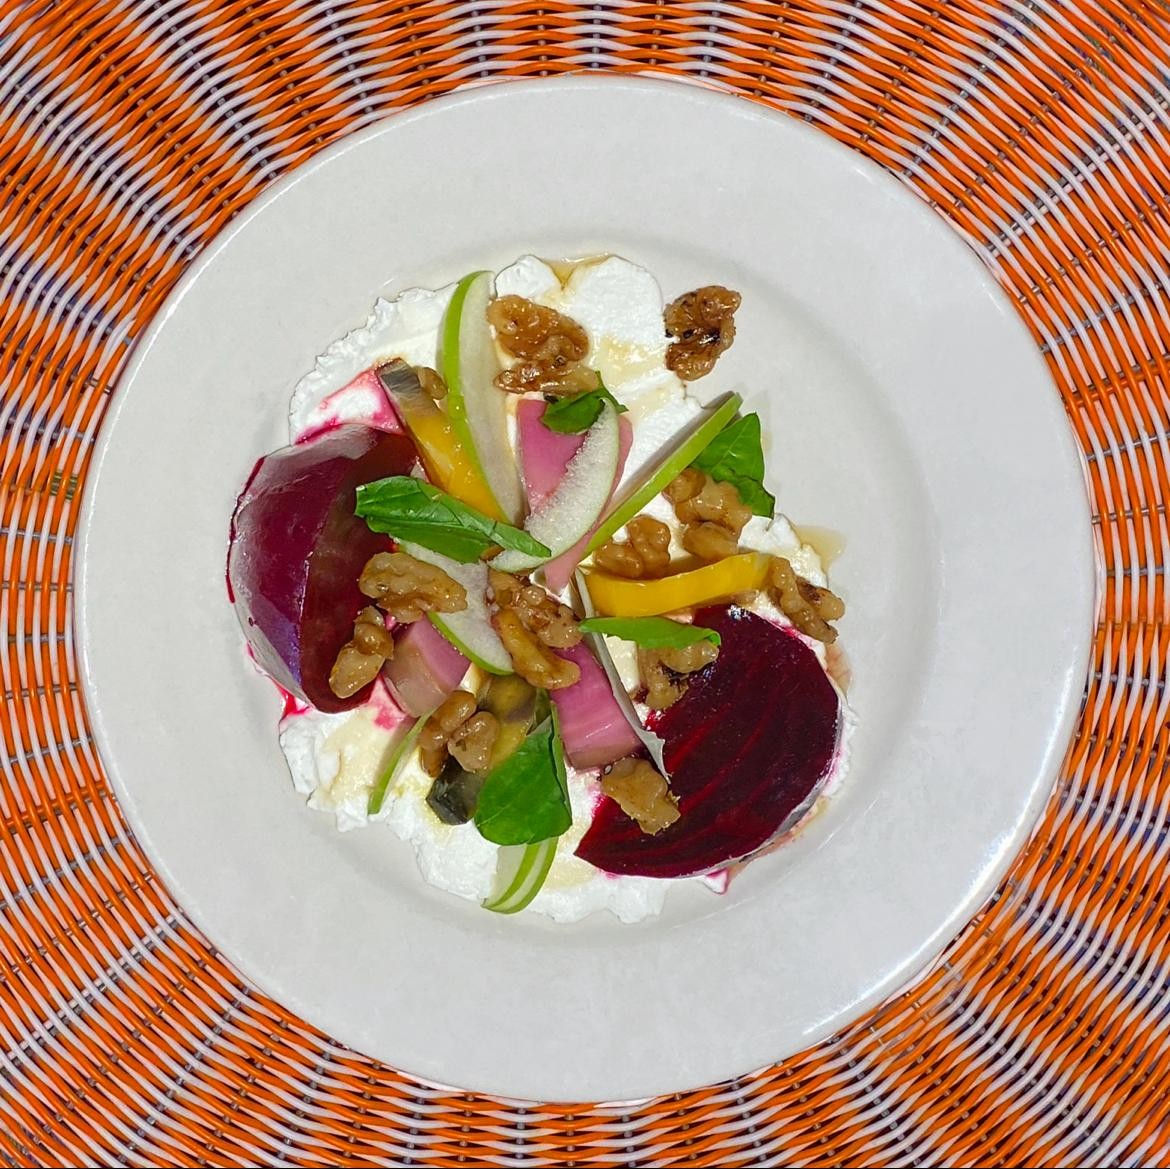 Beets & Goat Cheese Salad